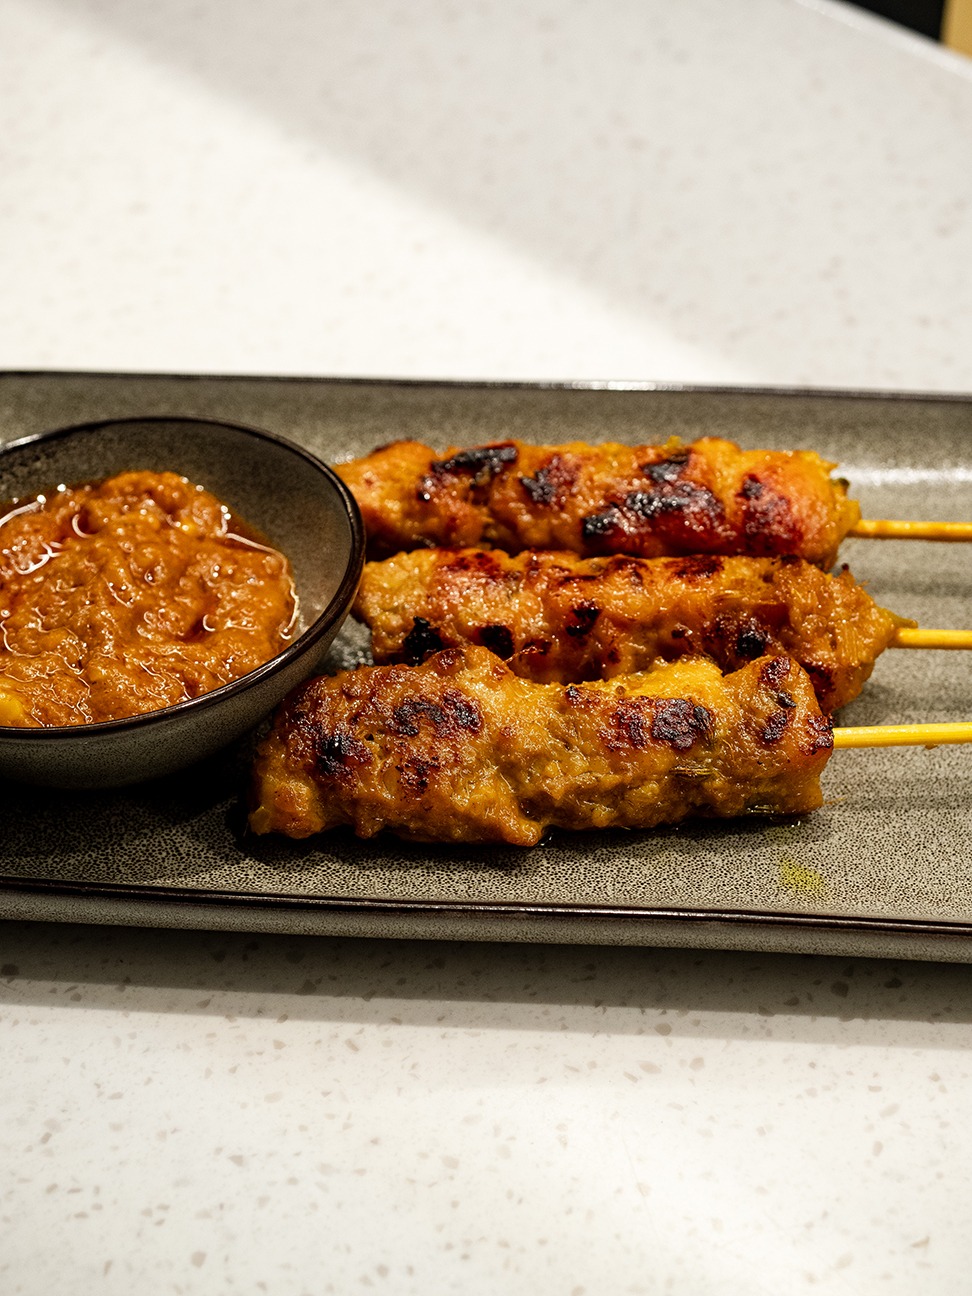 Char grilled chicken satay 7th cat